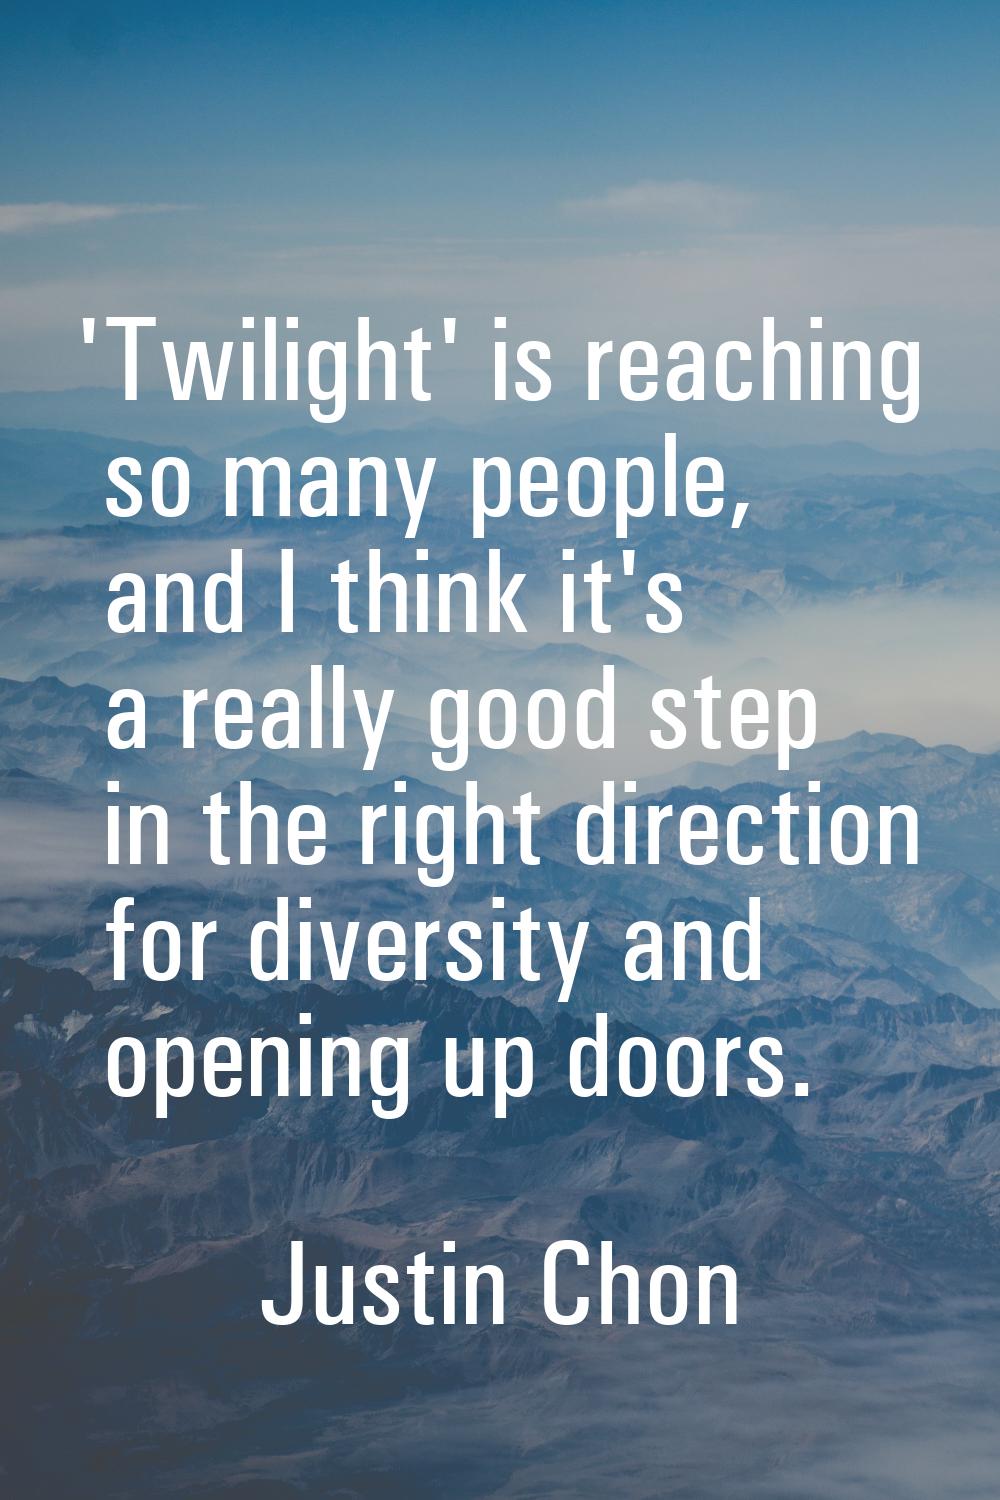 'Twilight' is reaching so many people, and I think it's a really good step in the right direction f